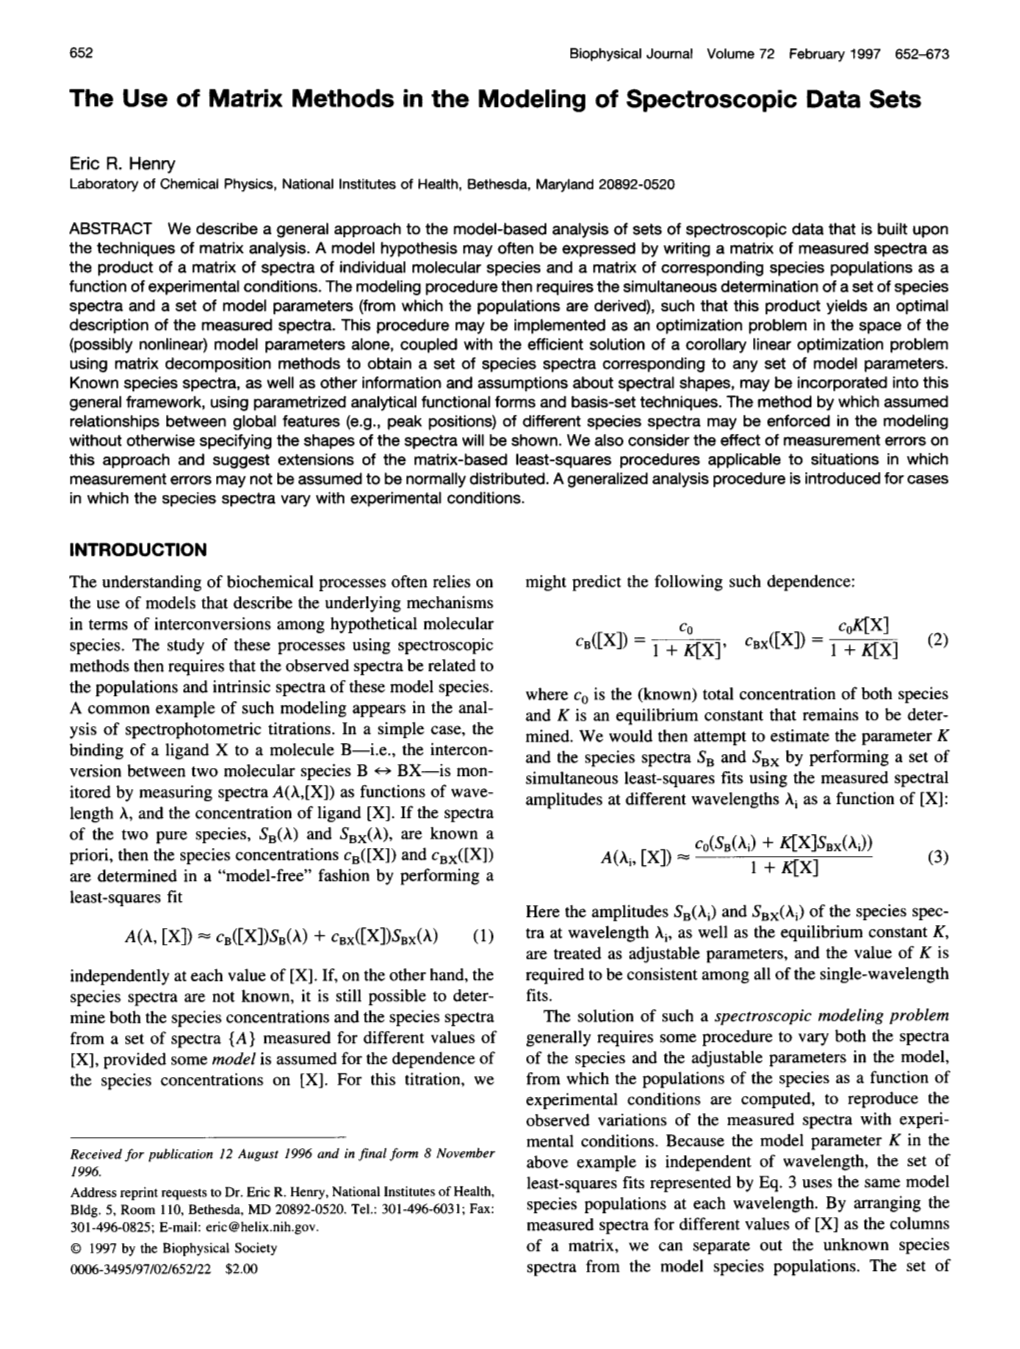 The Use of Matrix Methods in the Modeling of Spectroscopic Data Sets